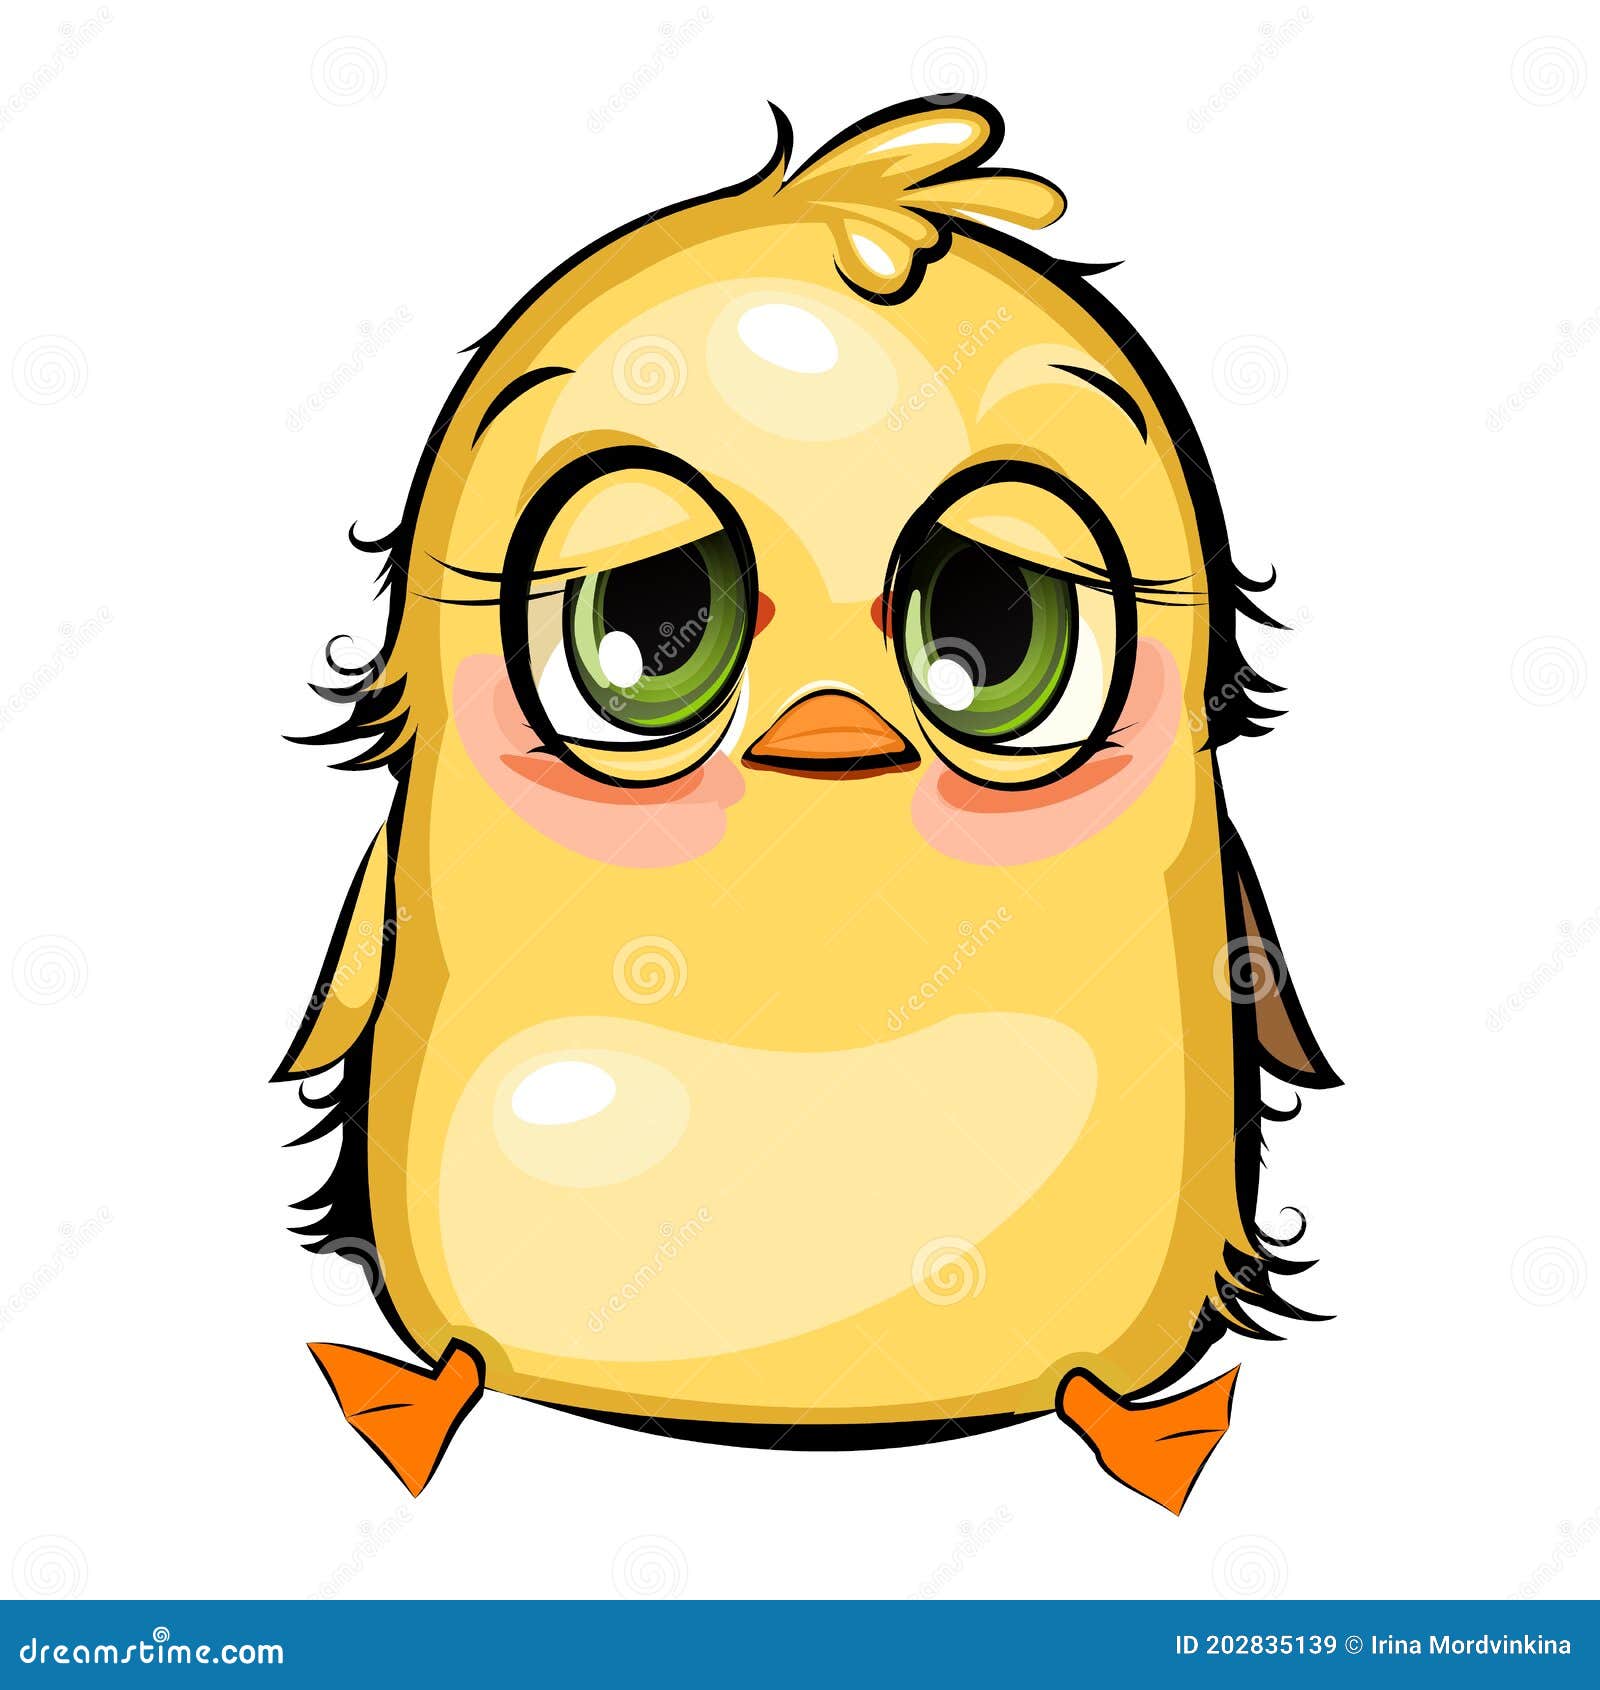 Sleepy Duckling. Funny Chick. Wants To Sleep. Cute and Funny Baby Bird  Stock Vector - Illustration of caricature, comic: 202835139